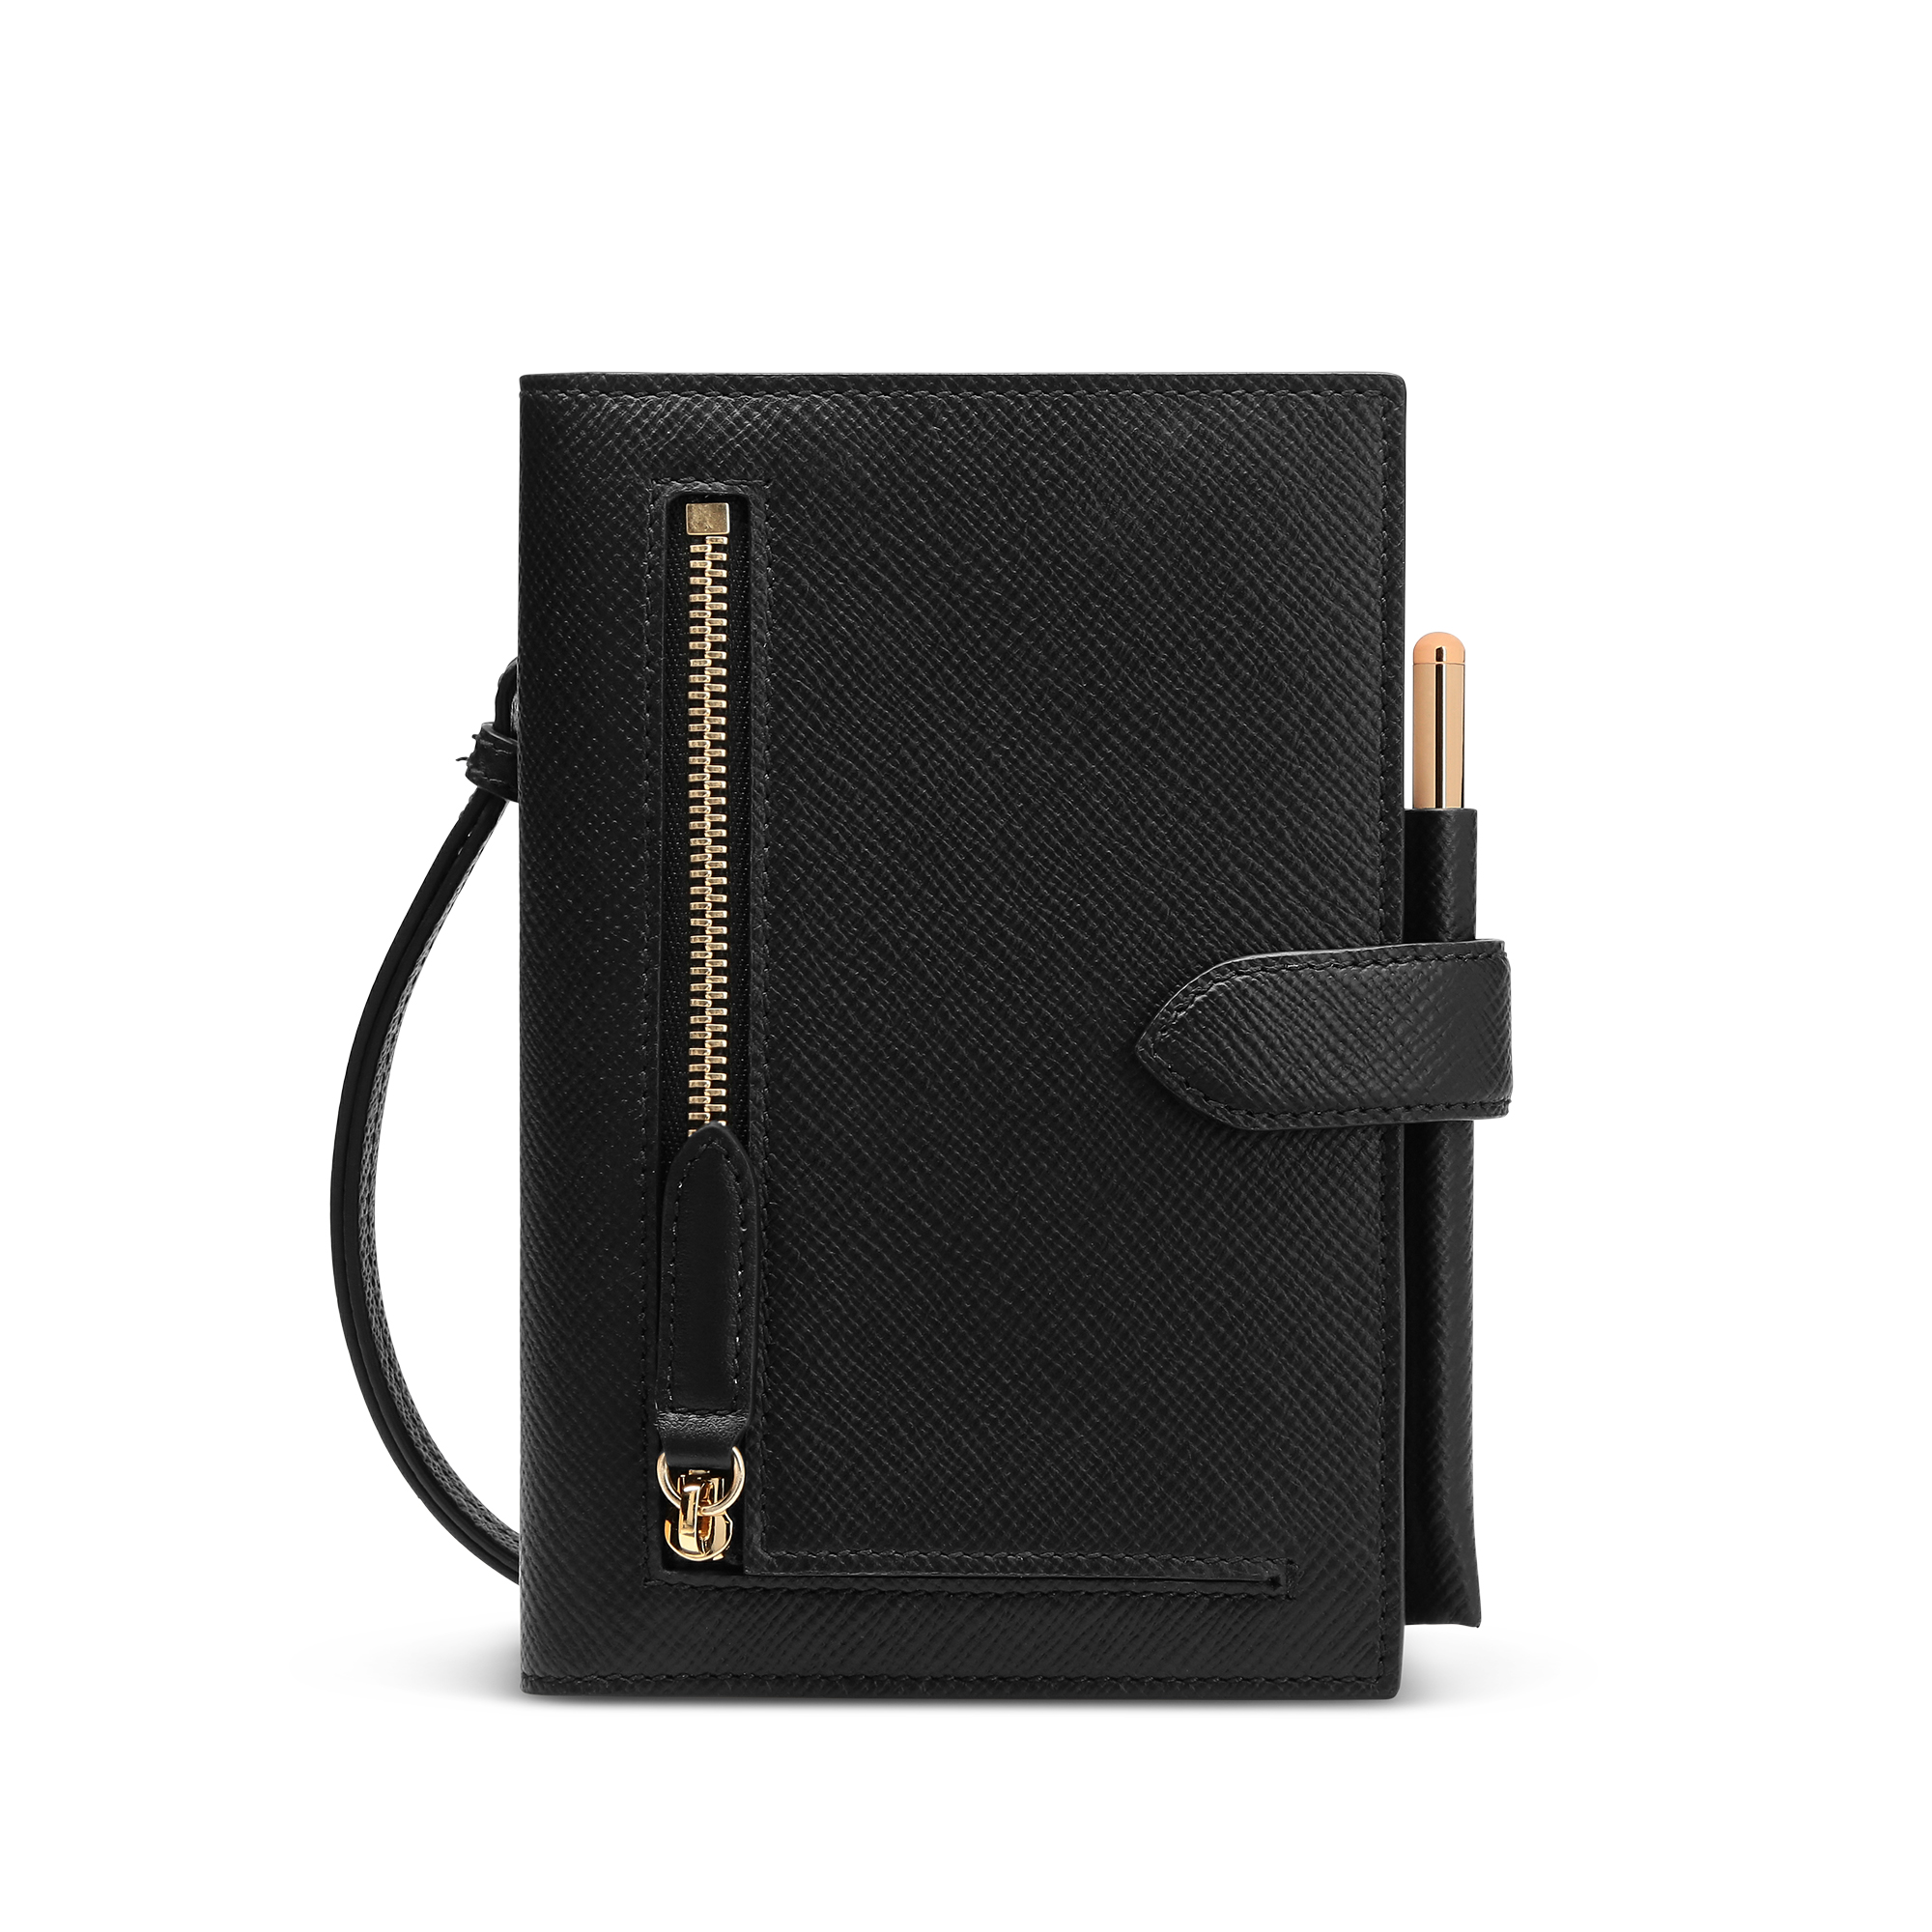 Smythson Notebook Organiser With Strap In Panama In Black